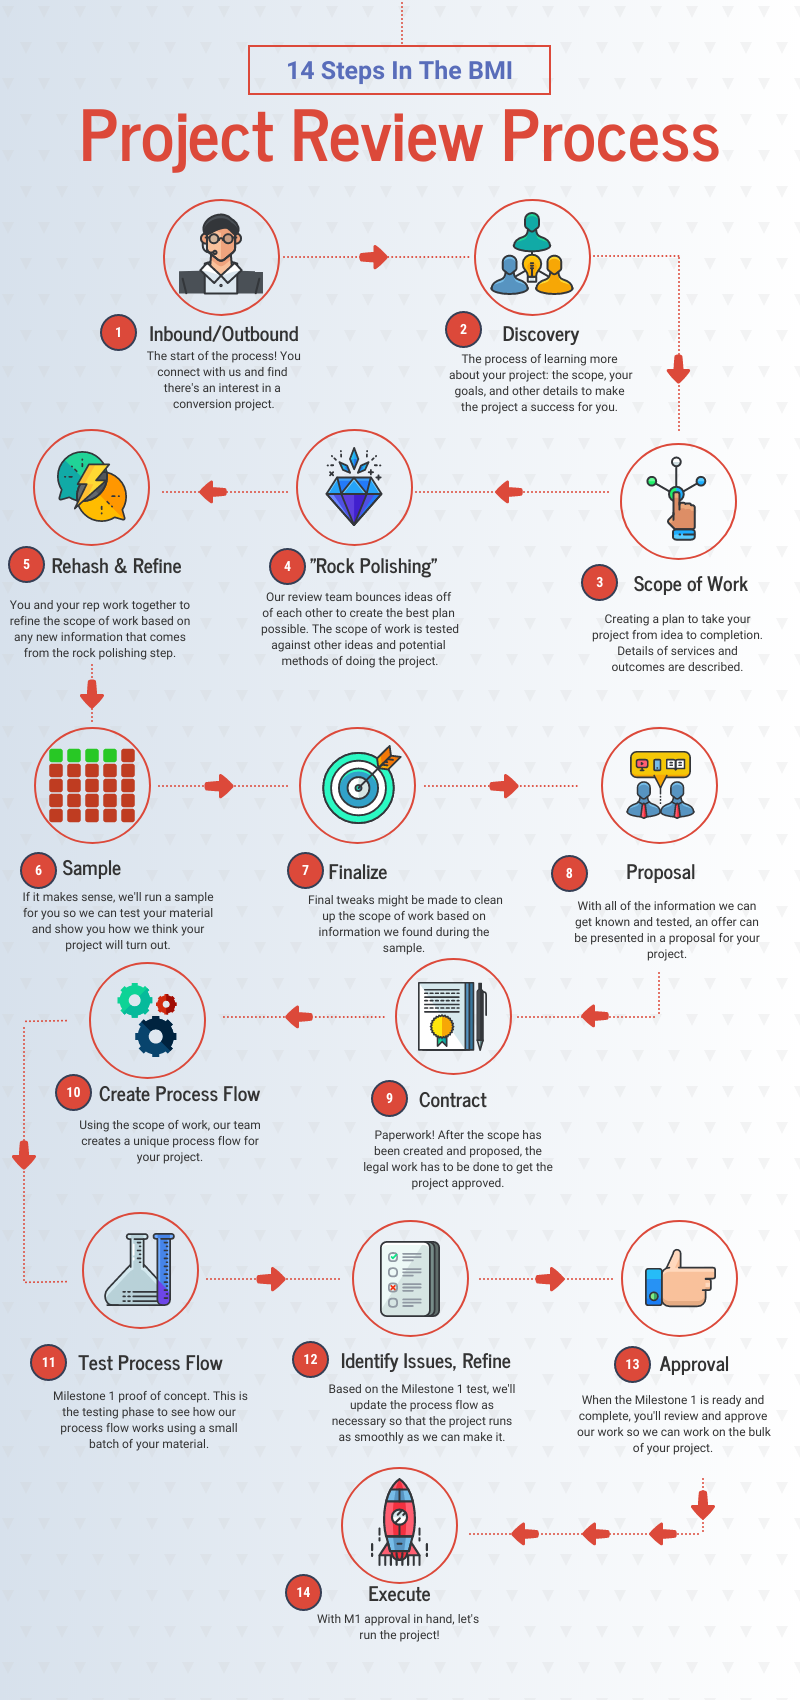 Project Review Process (Infographic)